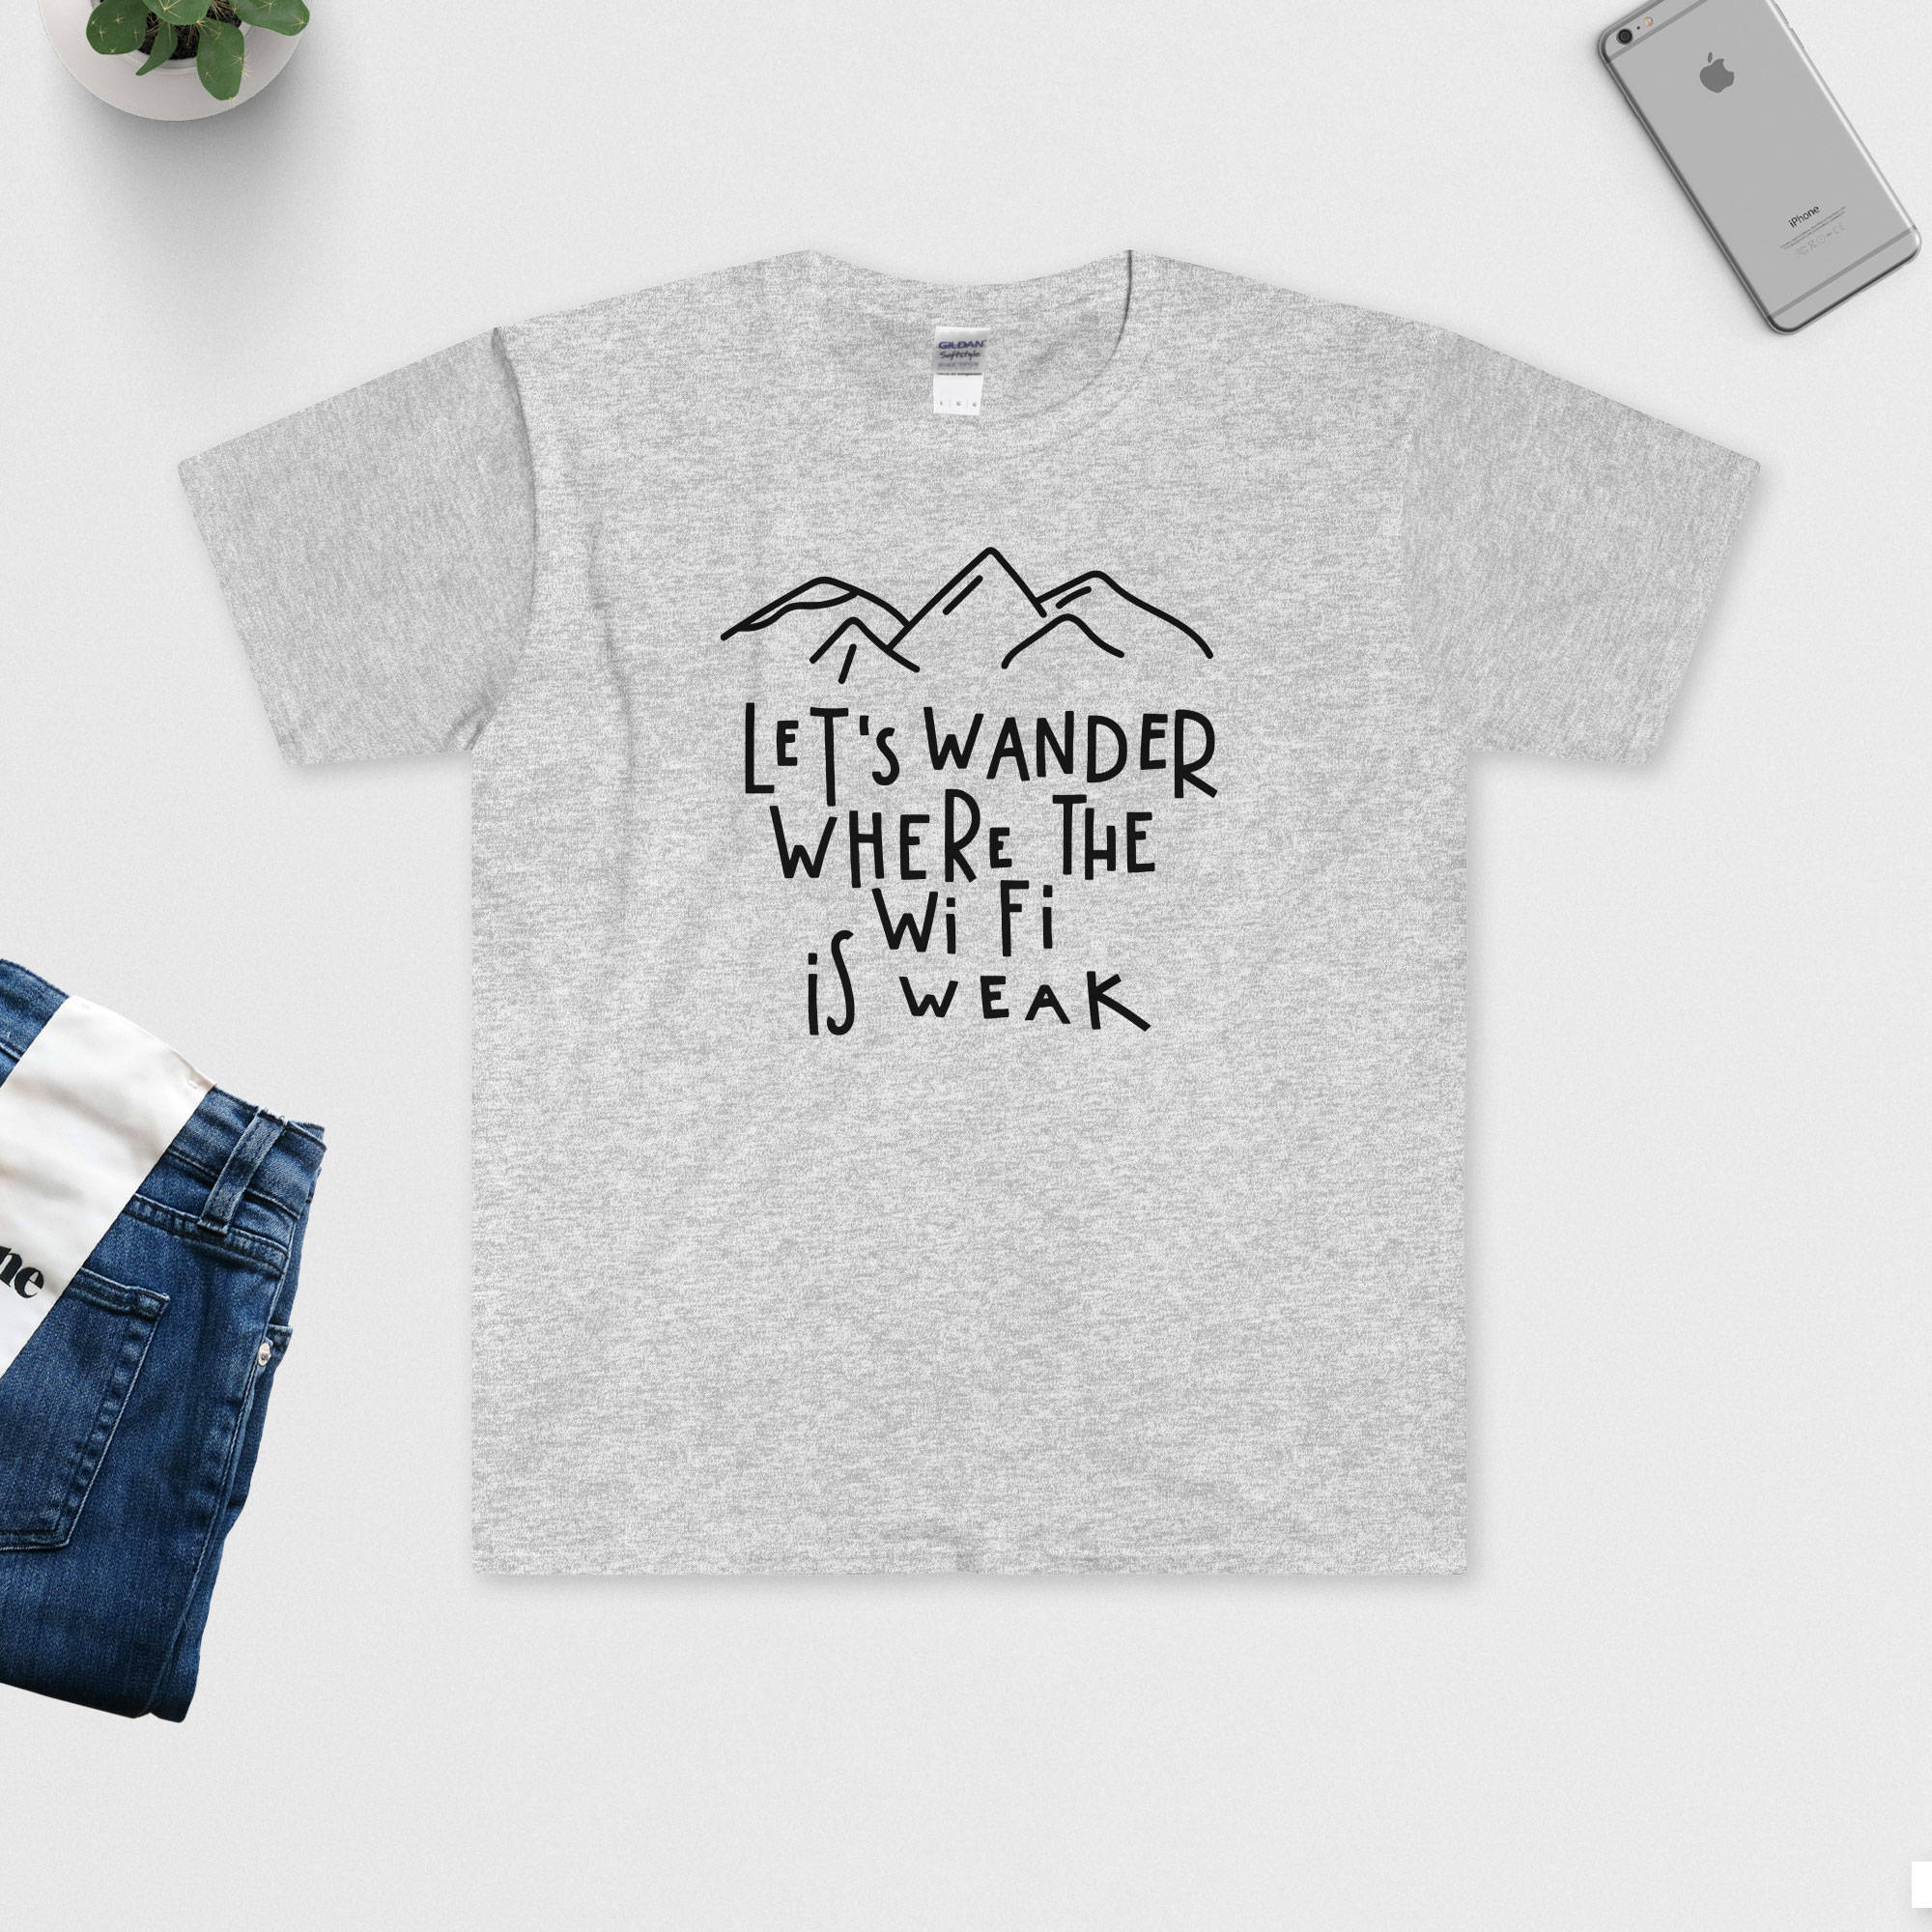 Let's Wander Where the WiFi is Weak T-Shirt Travel | Etsy